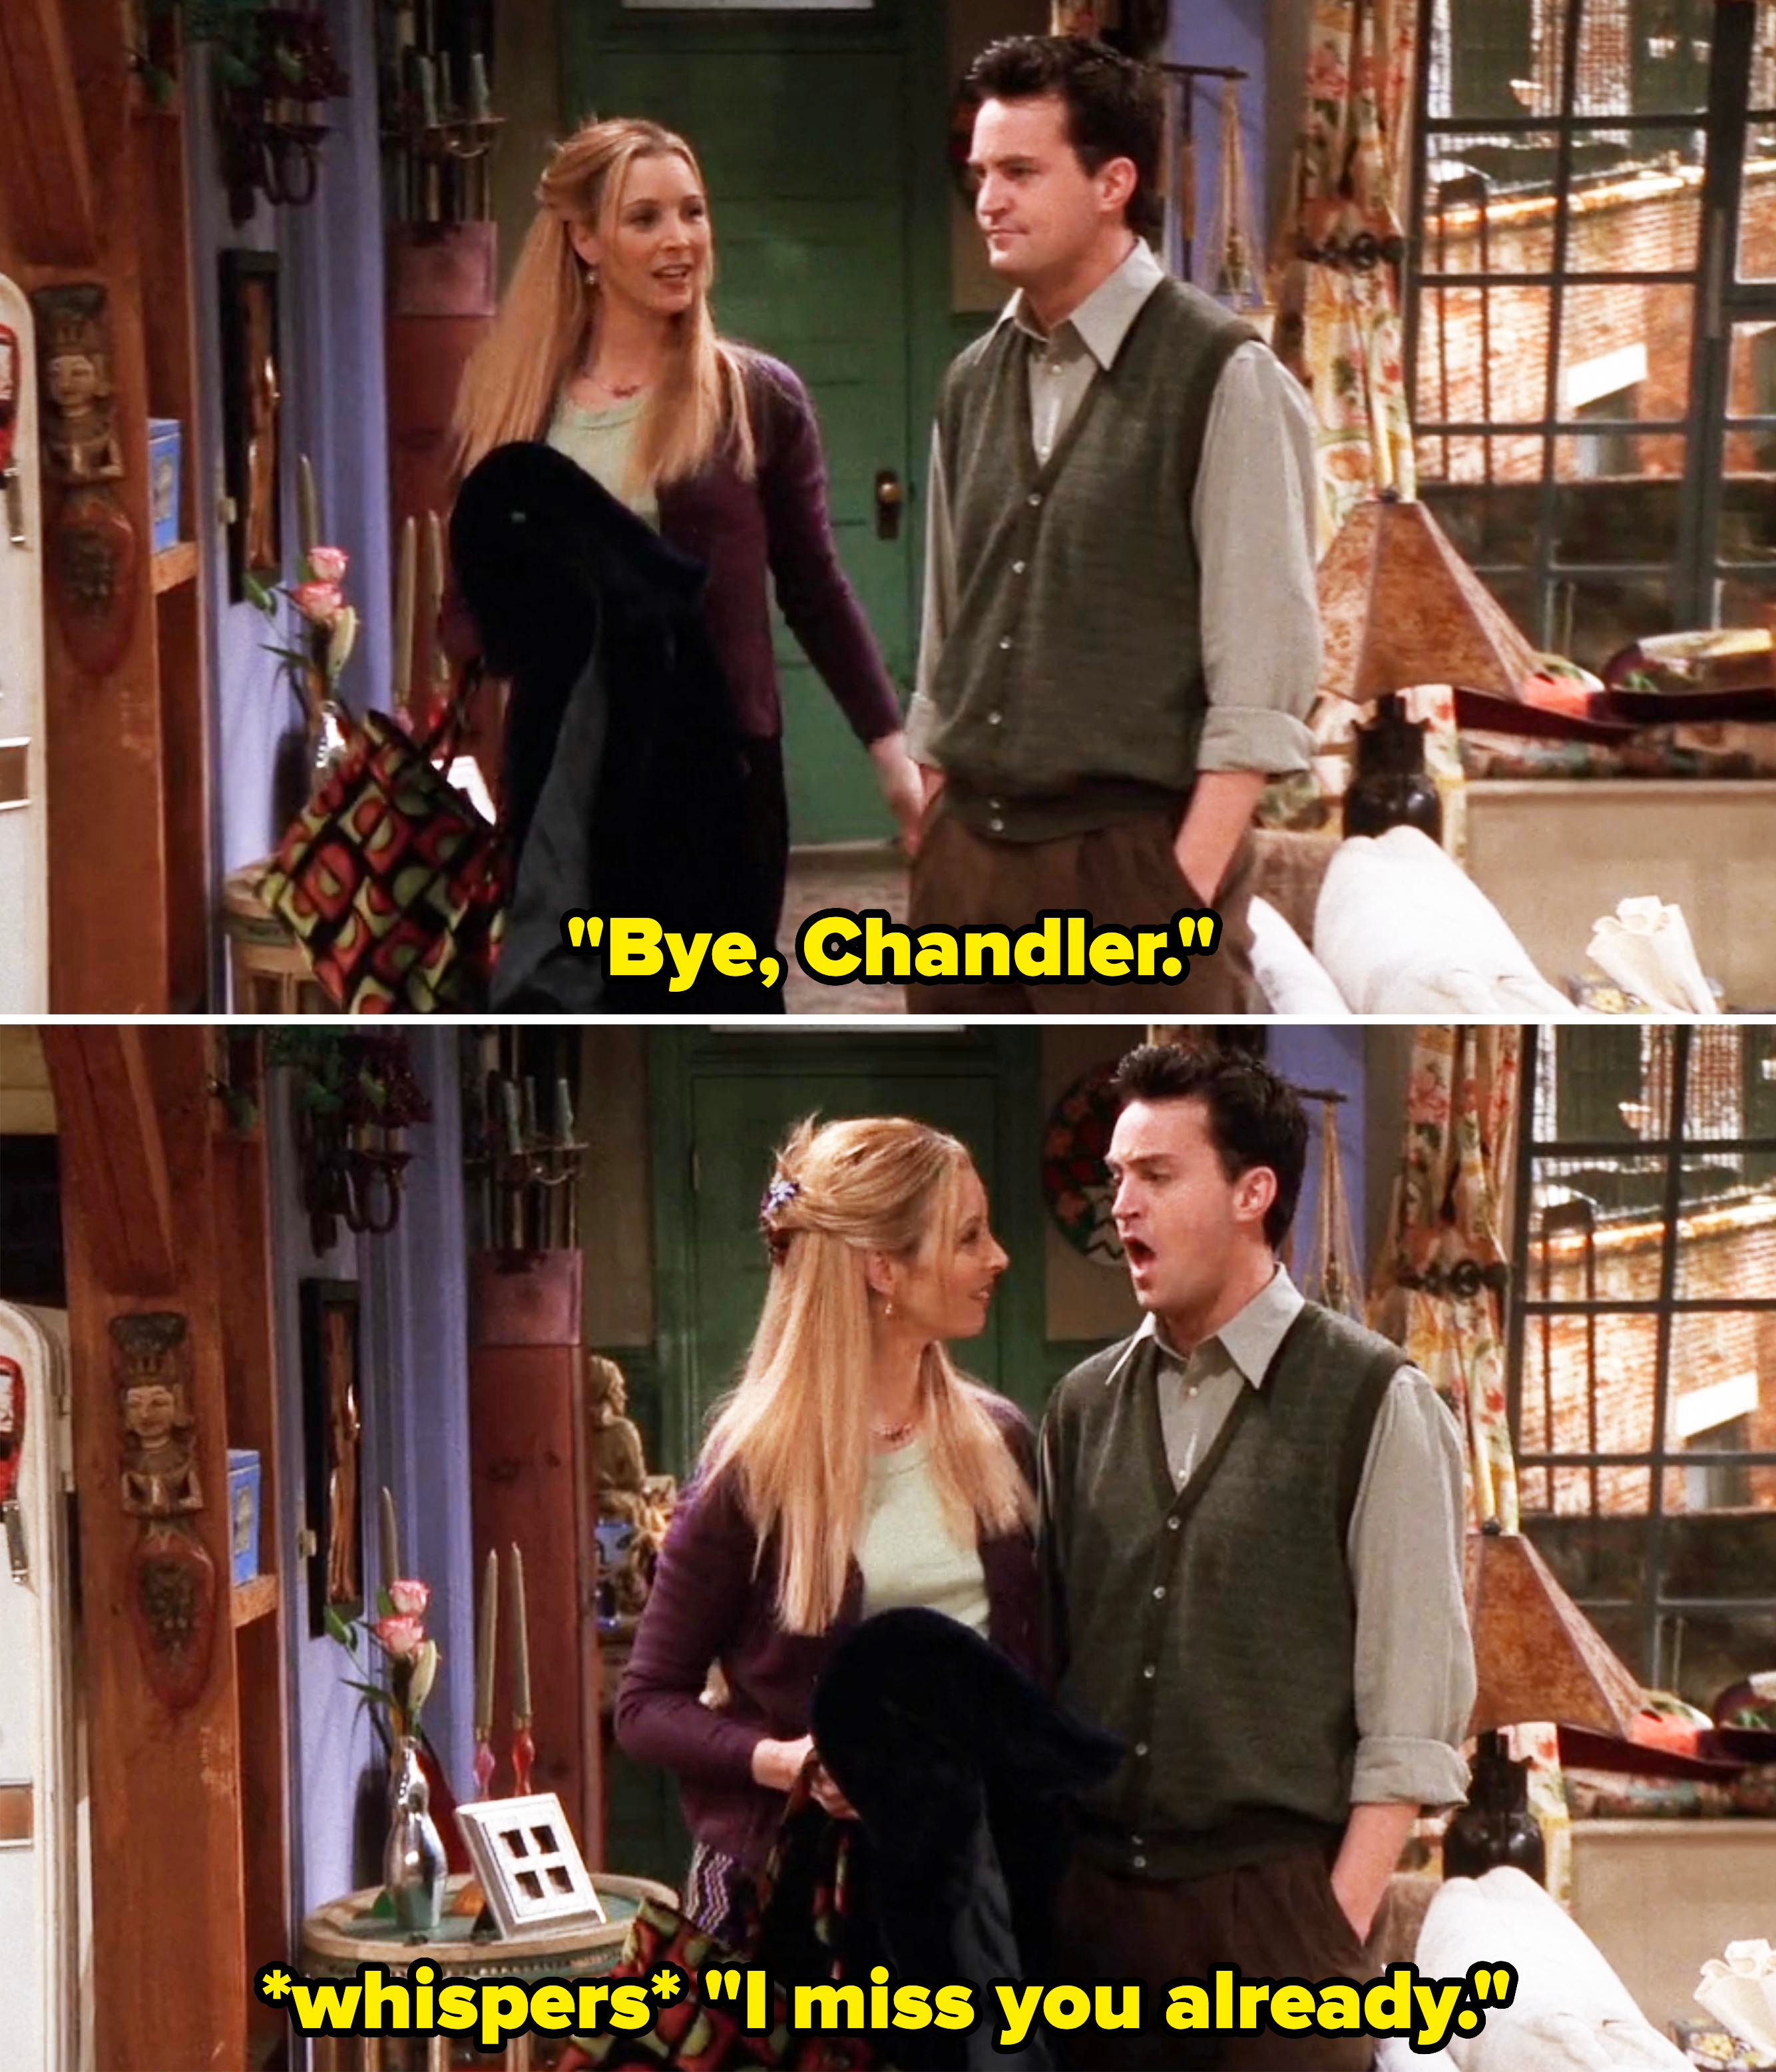 phoebe approaching him and whispering, i miss you already